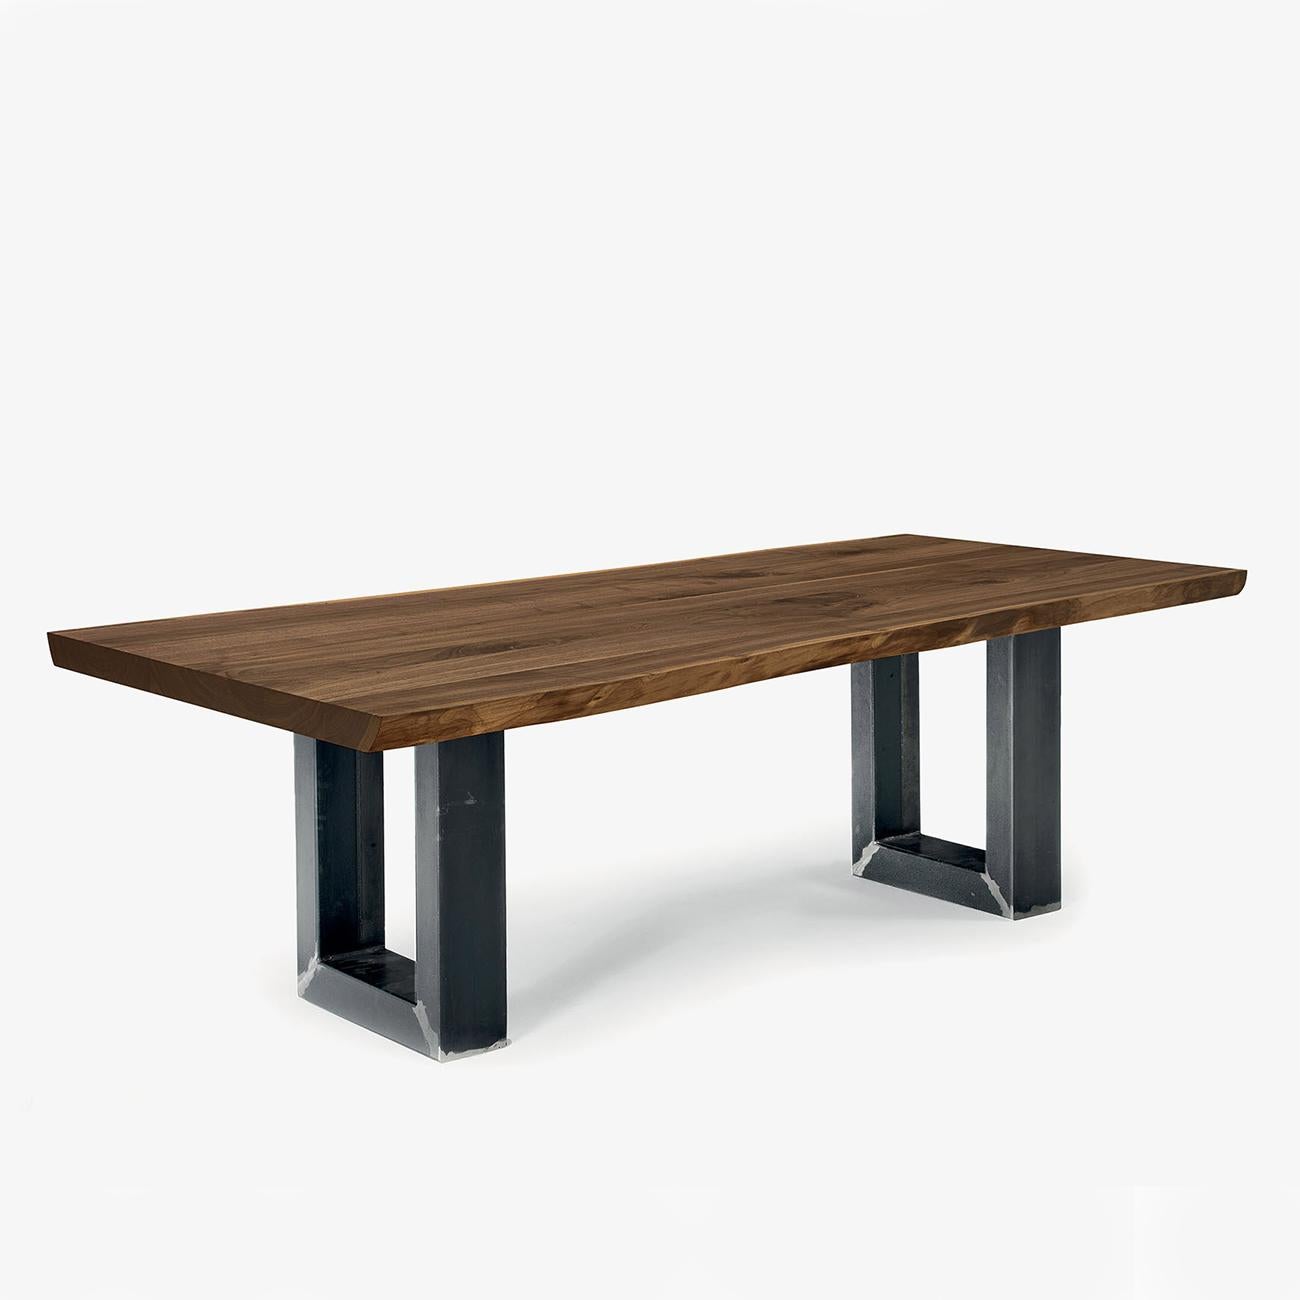 Dining table real edges walnut with solid walnut top,
6.5 mm thickness and with real wood slats edges. With
2 iron U-shape base, with visible weld joints, iron in oiled
finish. Available in:
L 200 x D 100 x H 75cm, price: 9900,00€.
L 220 x D100 x H